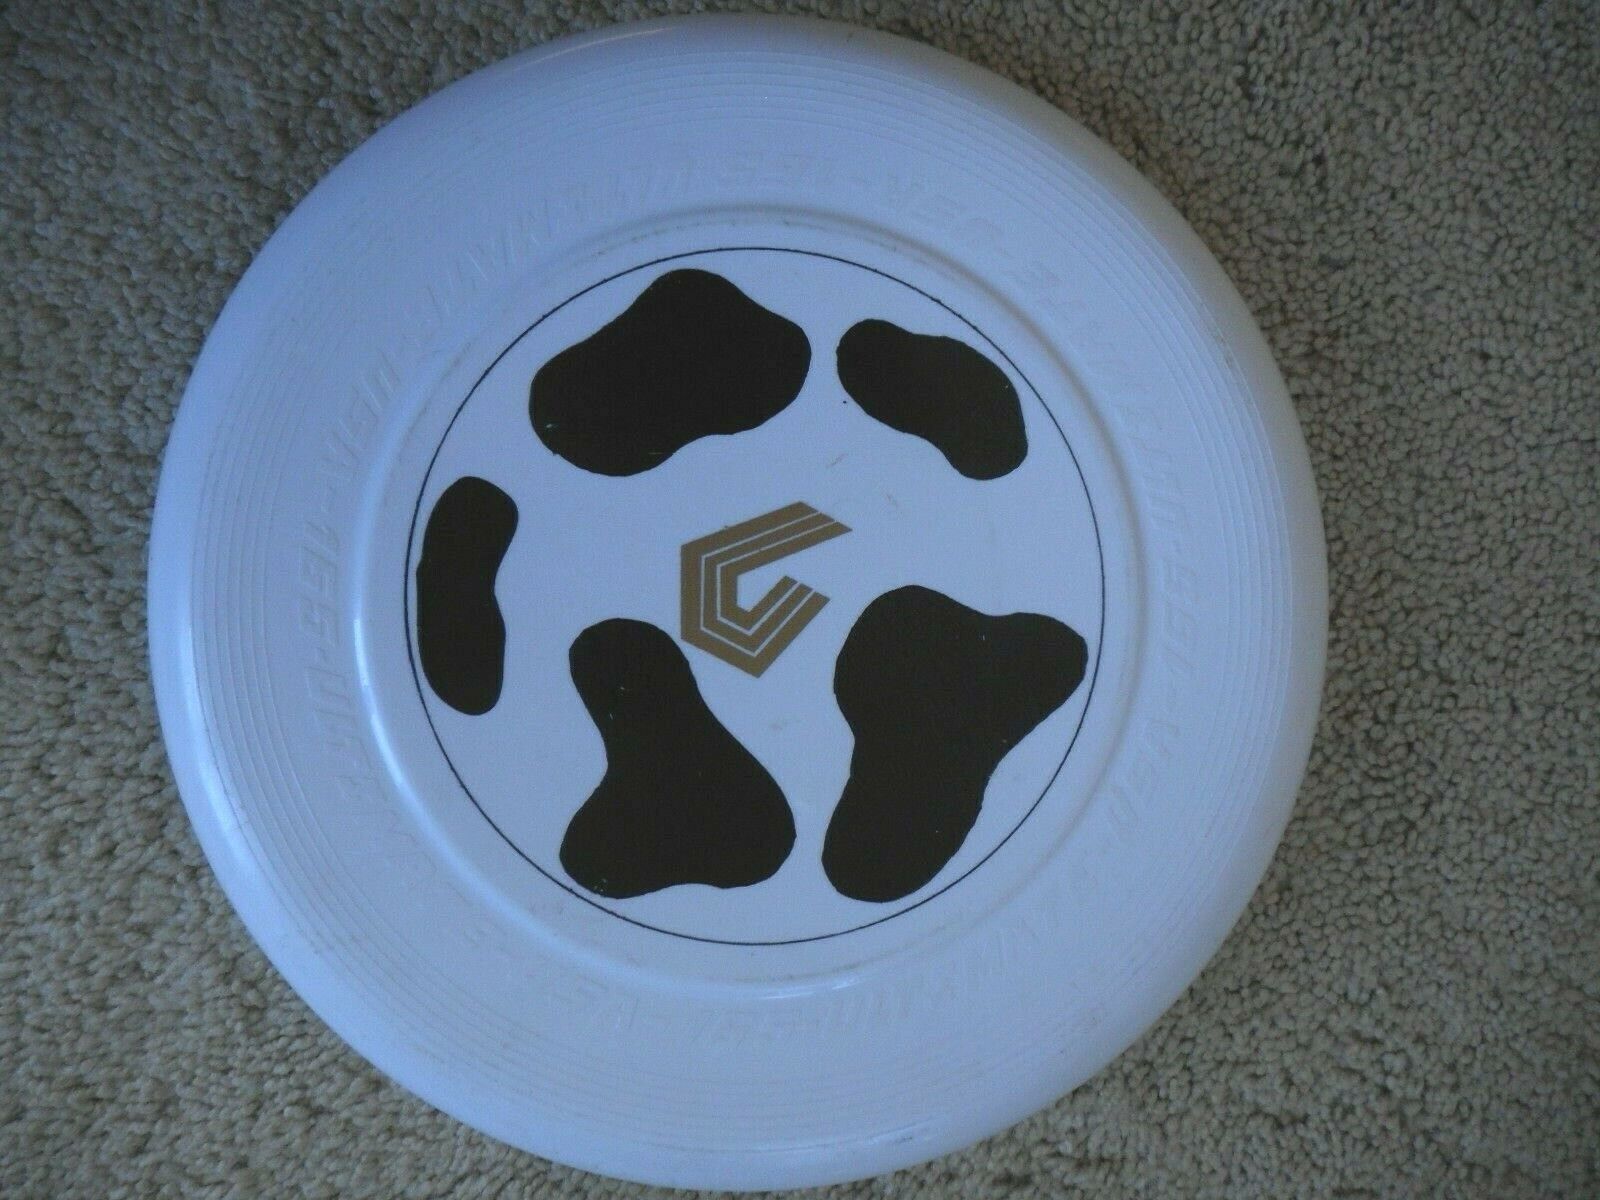 Vintage Gateway 2000 Computer Frisbee Advertising Computer Geeks Collect 10.5\